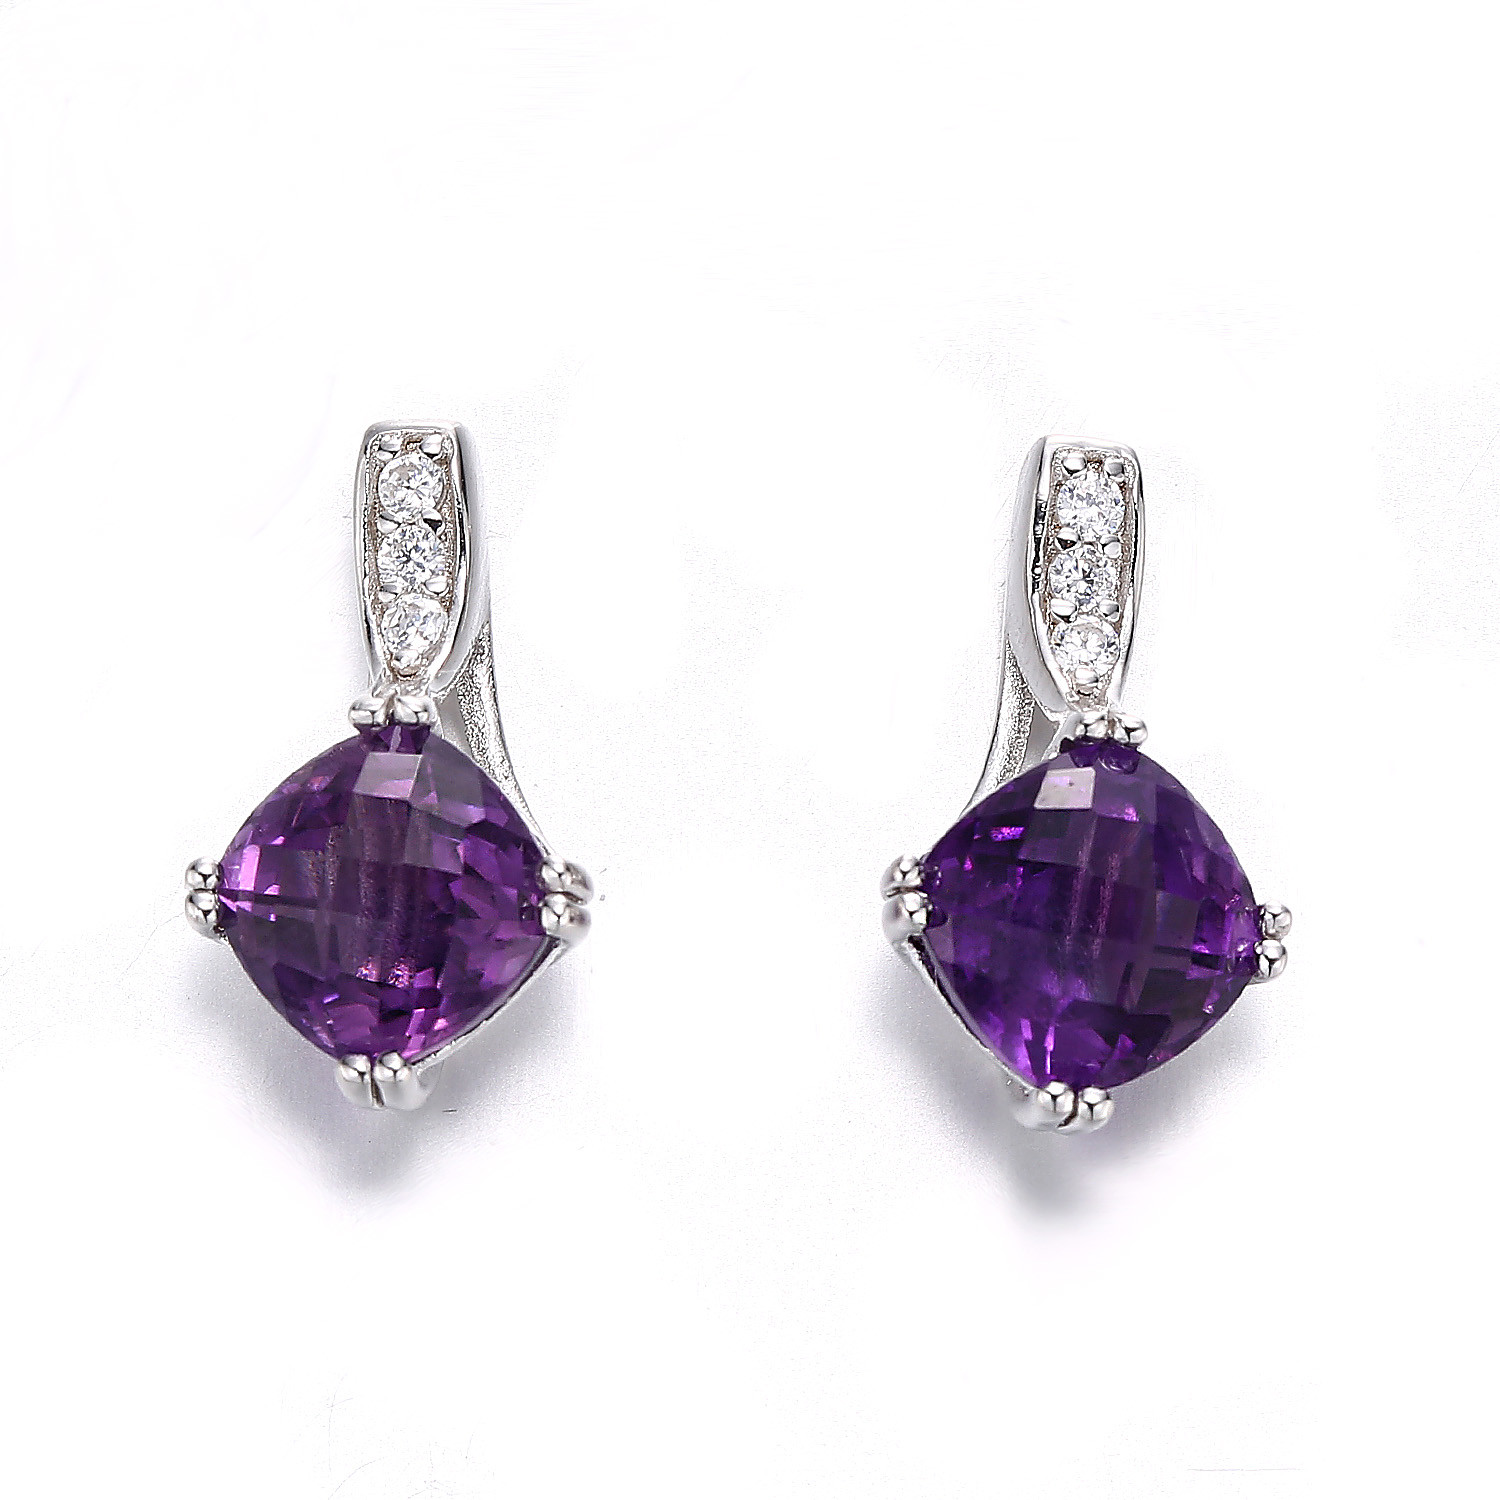 Wholesale 2.18g Sterling Silver Gemstone Stud Earrings Cushion White Gold Amethyst Earrings from china suppliers